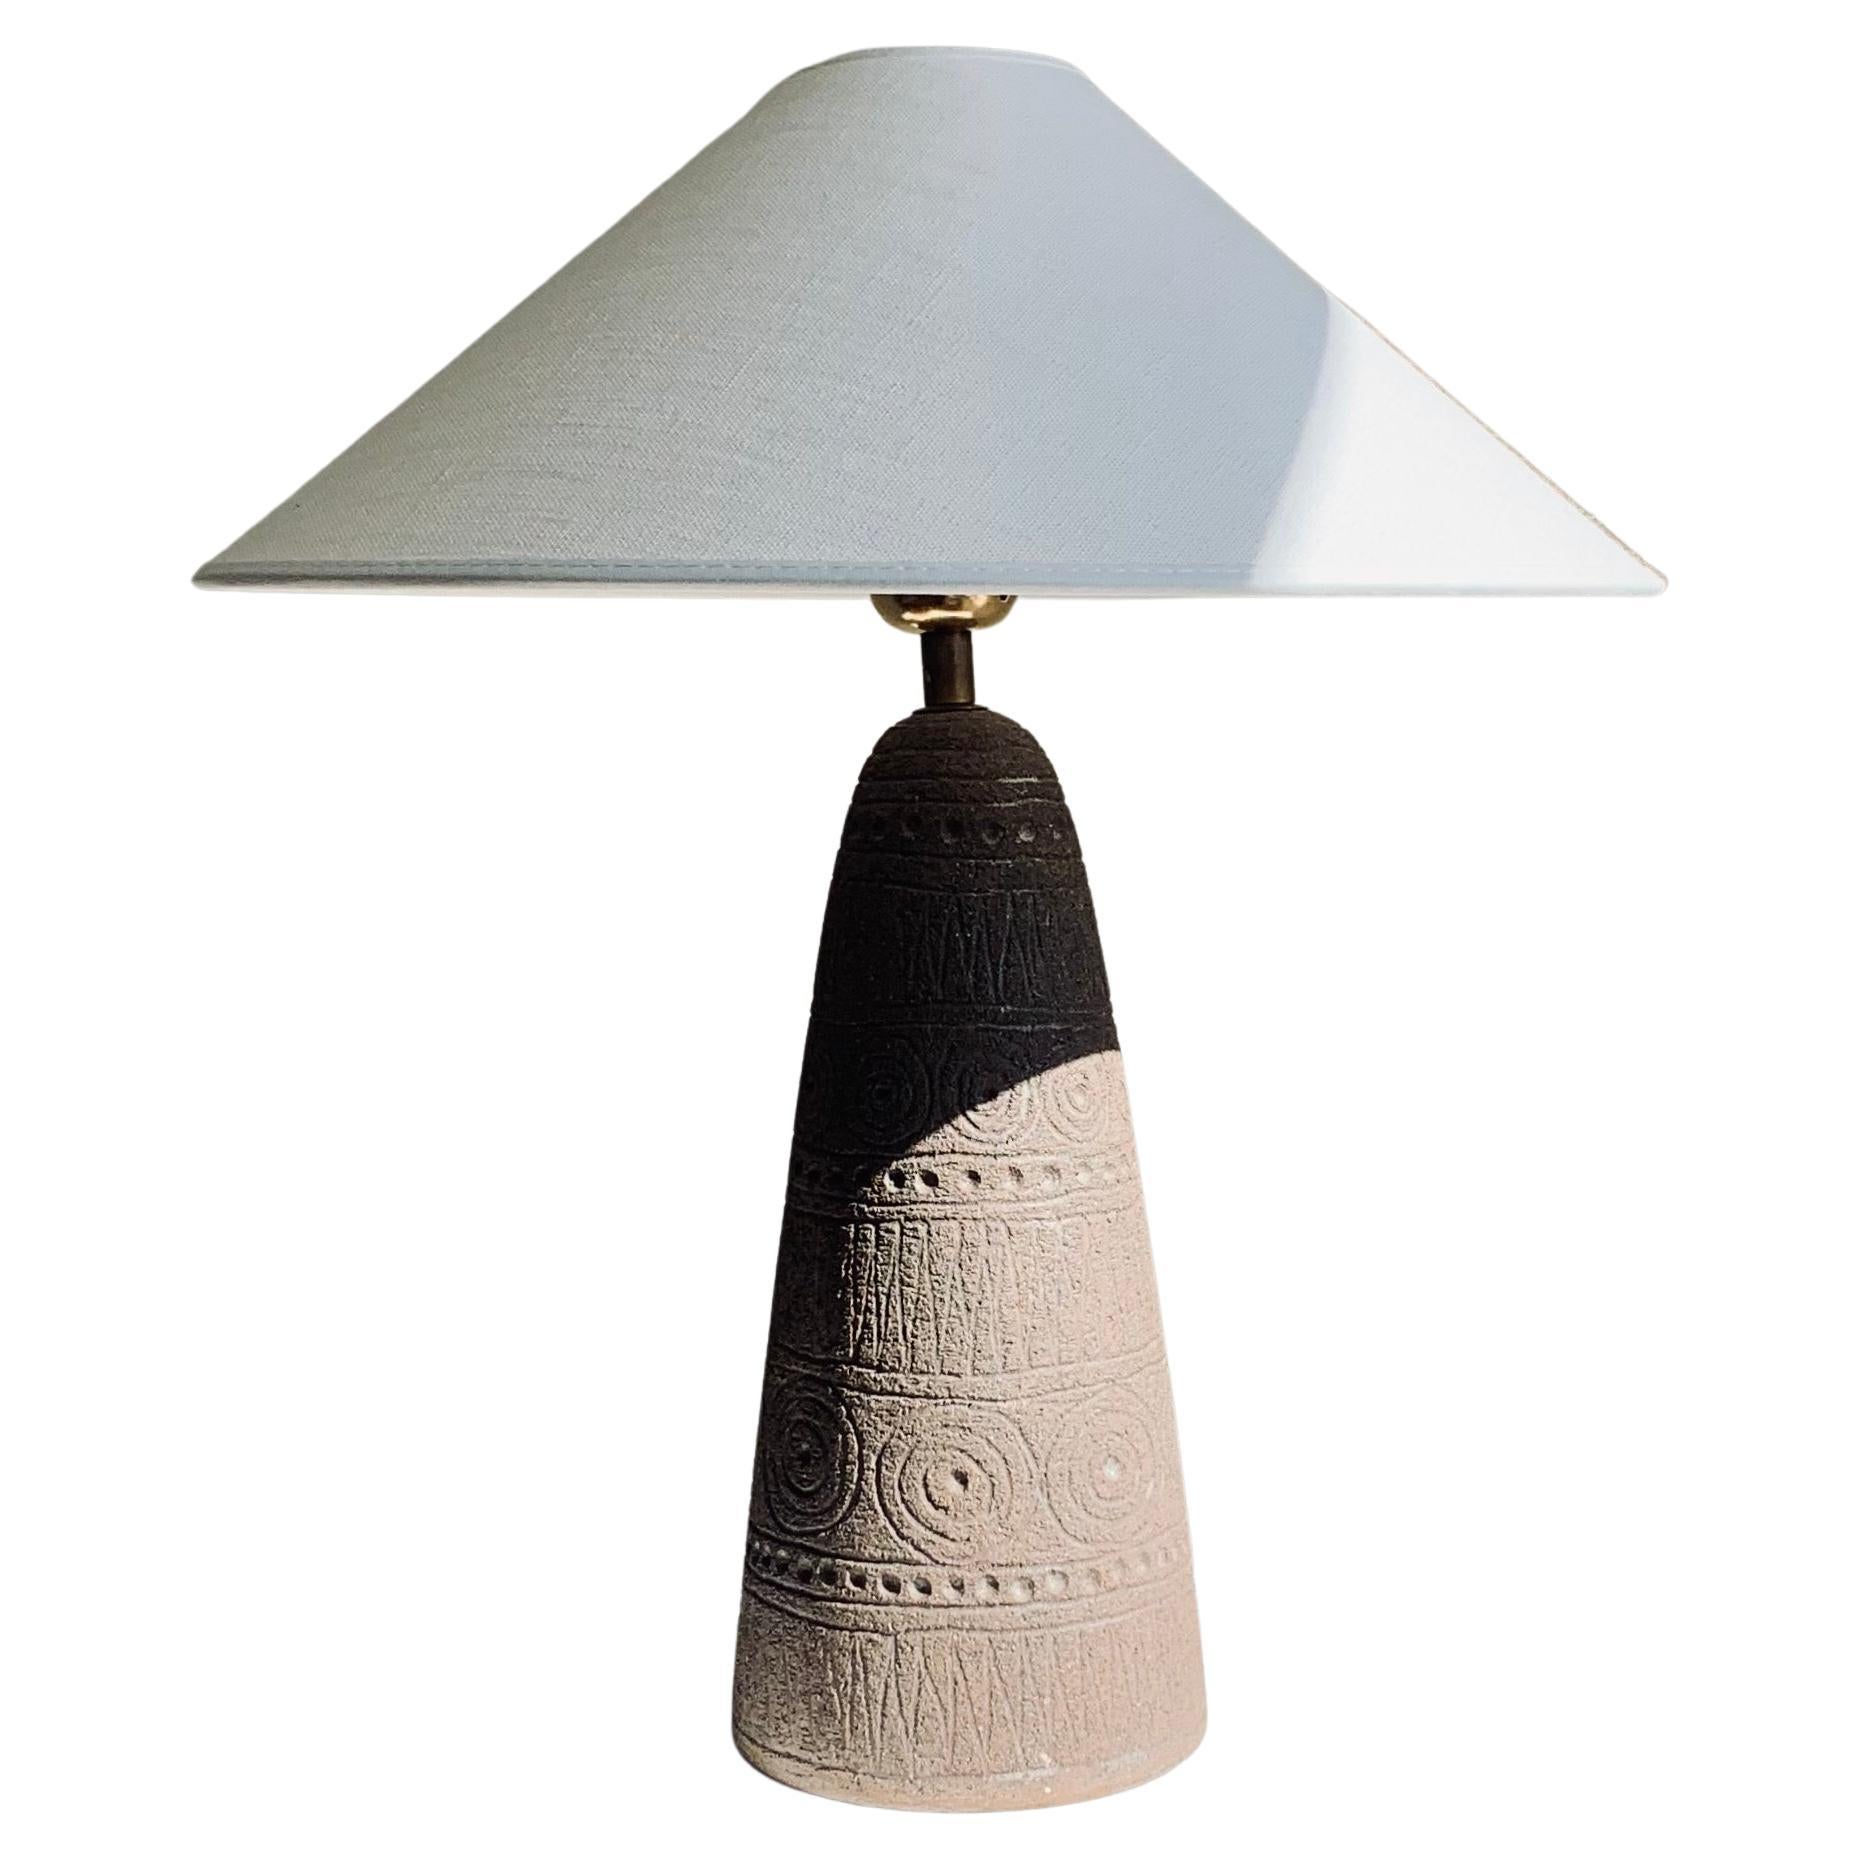 Brown cone shaped rustic earthenware table lamp by Swedish ceramicist and artist Elsi Bourelius, ca 1960. Swedish Modern lamp with decorative retro pattern and tactile rough surface. Made in her own studio. 

Height: 33.5 cm (including